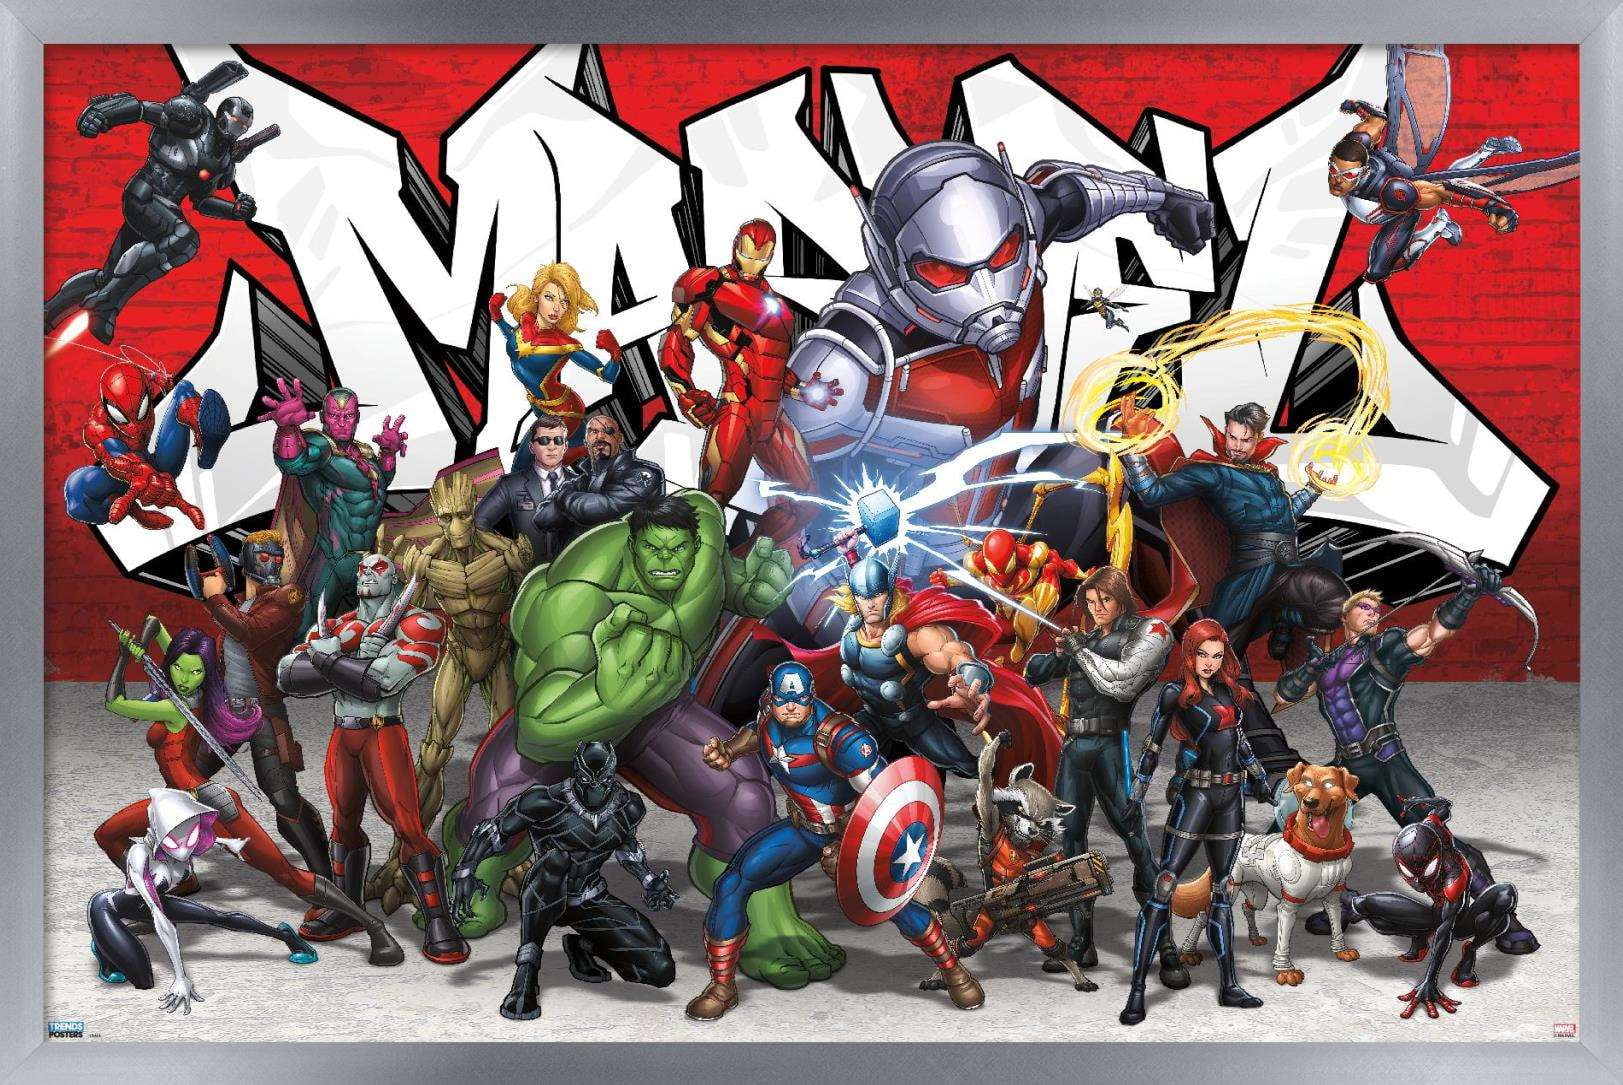 MARVEL COMICS - CHARACTER COLLAGE POSTER - 22x34 - AVENGERS 15503